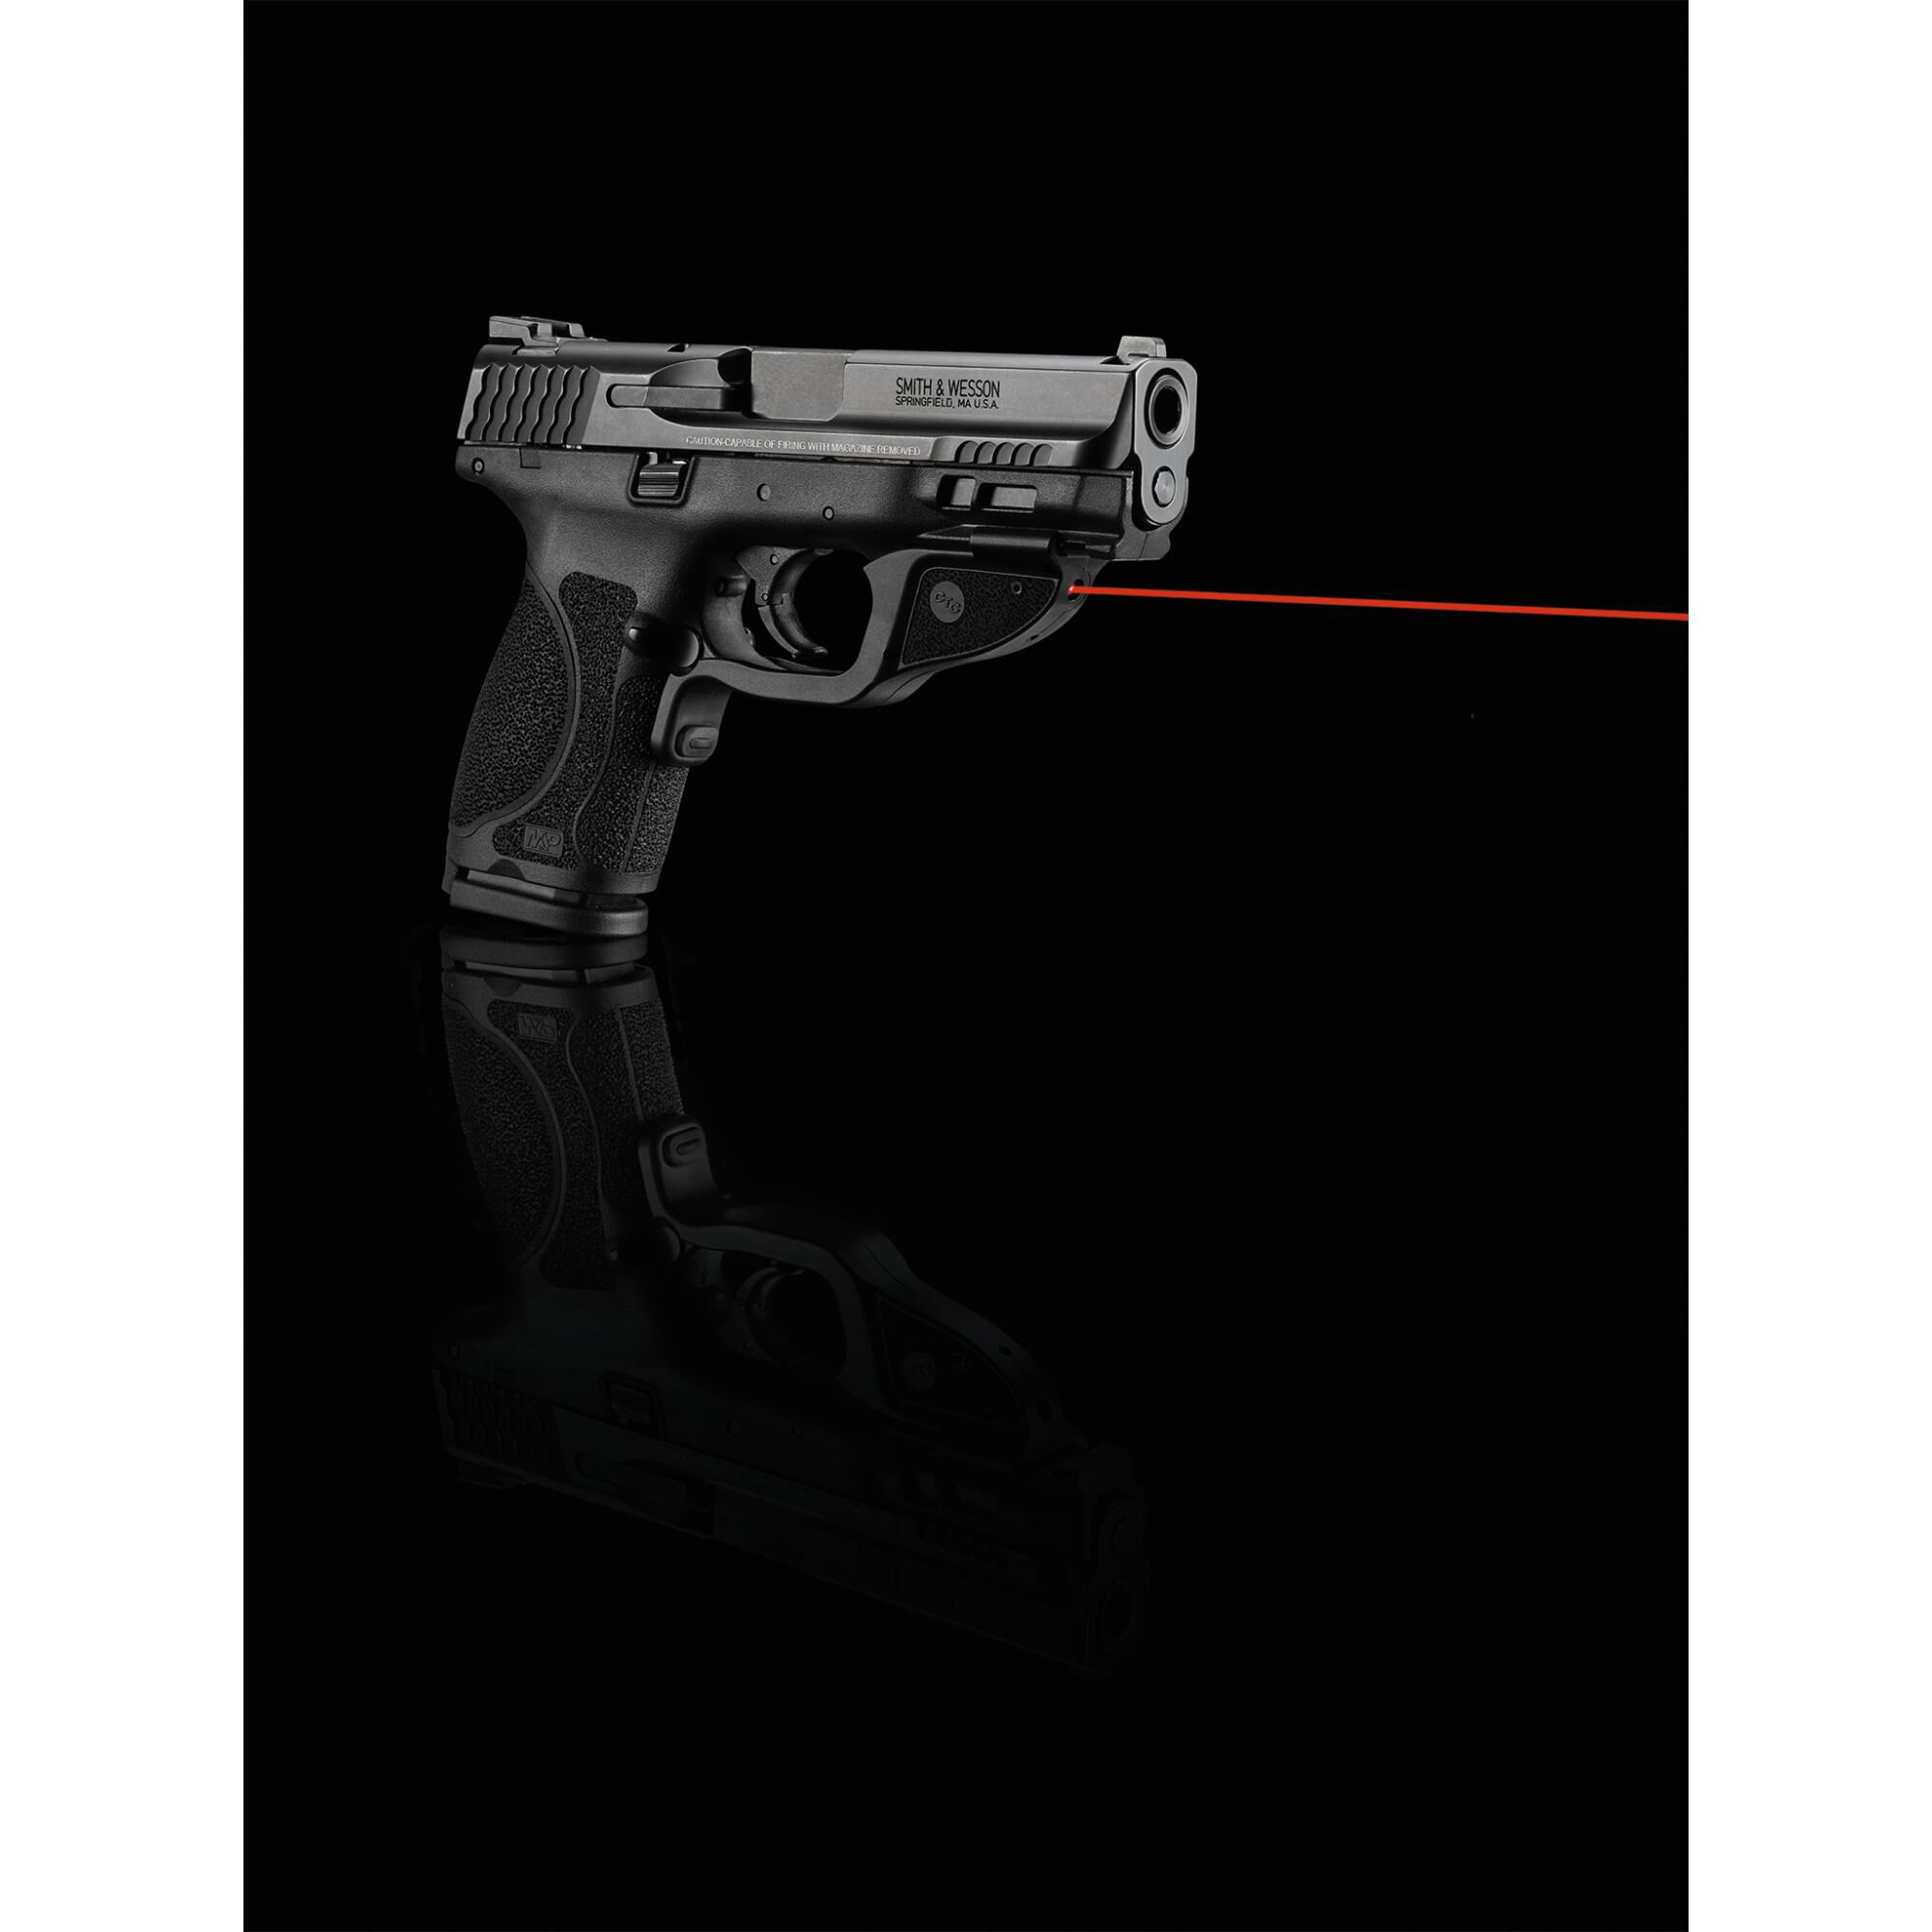 and Subcompact for sale online Crimson Trace LG-362G for Smith & Wesson M&P M2.0 Full-Size Compact 